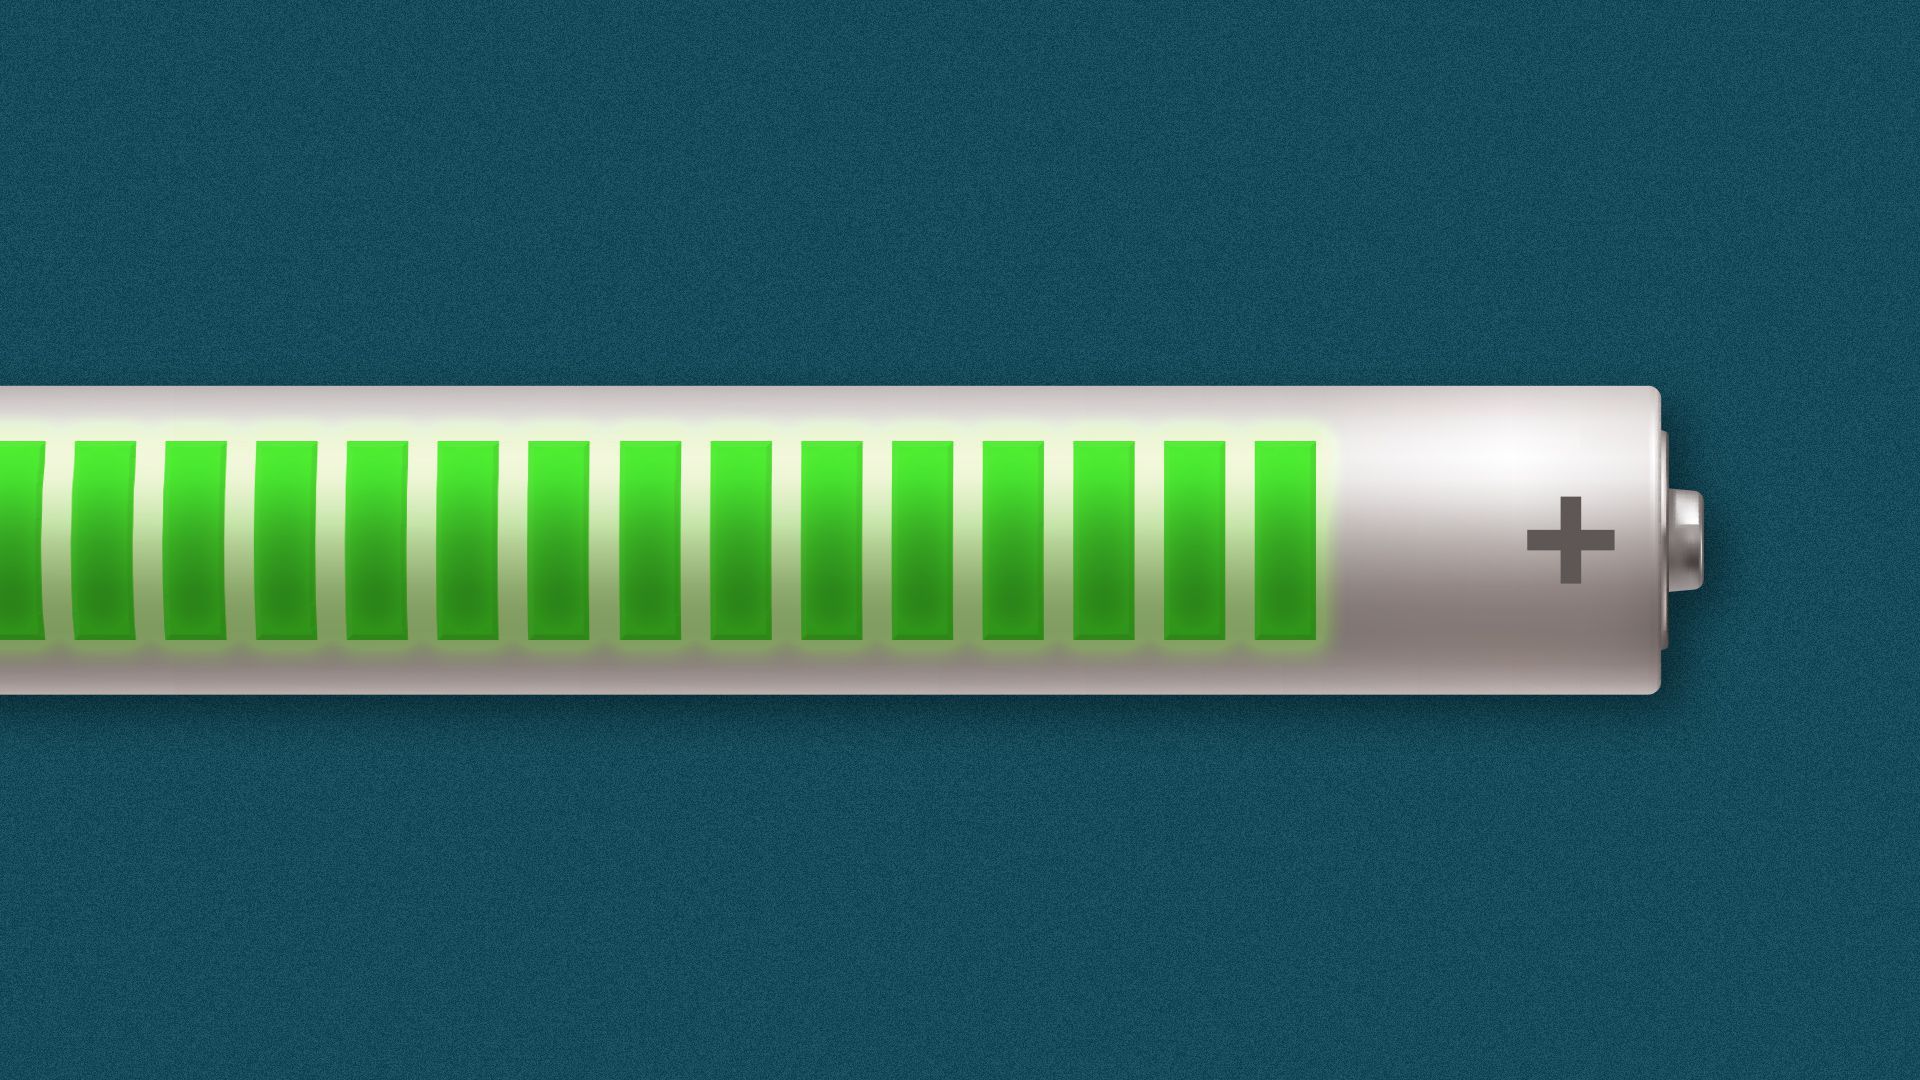 Illustration of an extra long battery with many charge indicator bars glowing green.